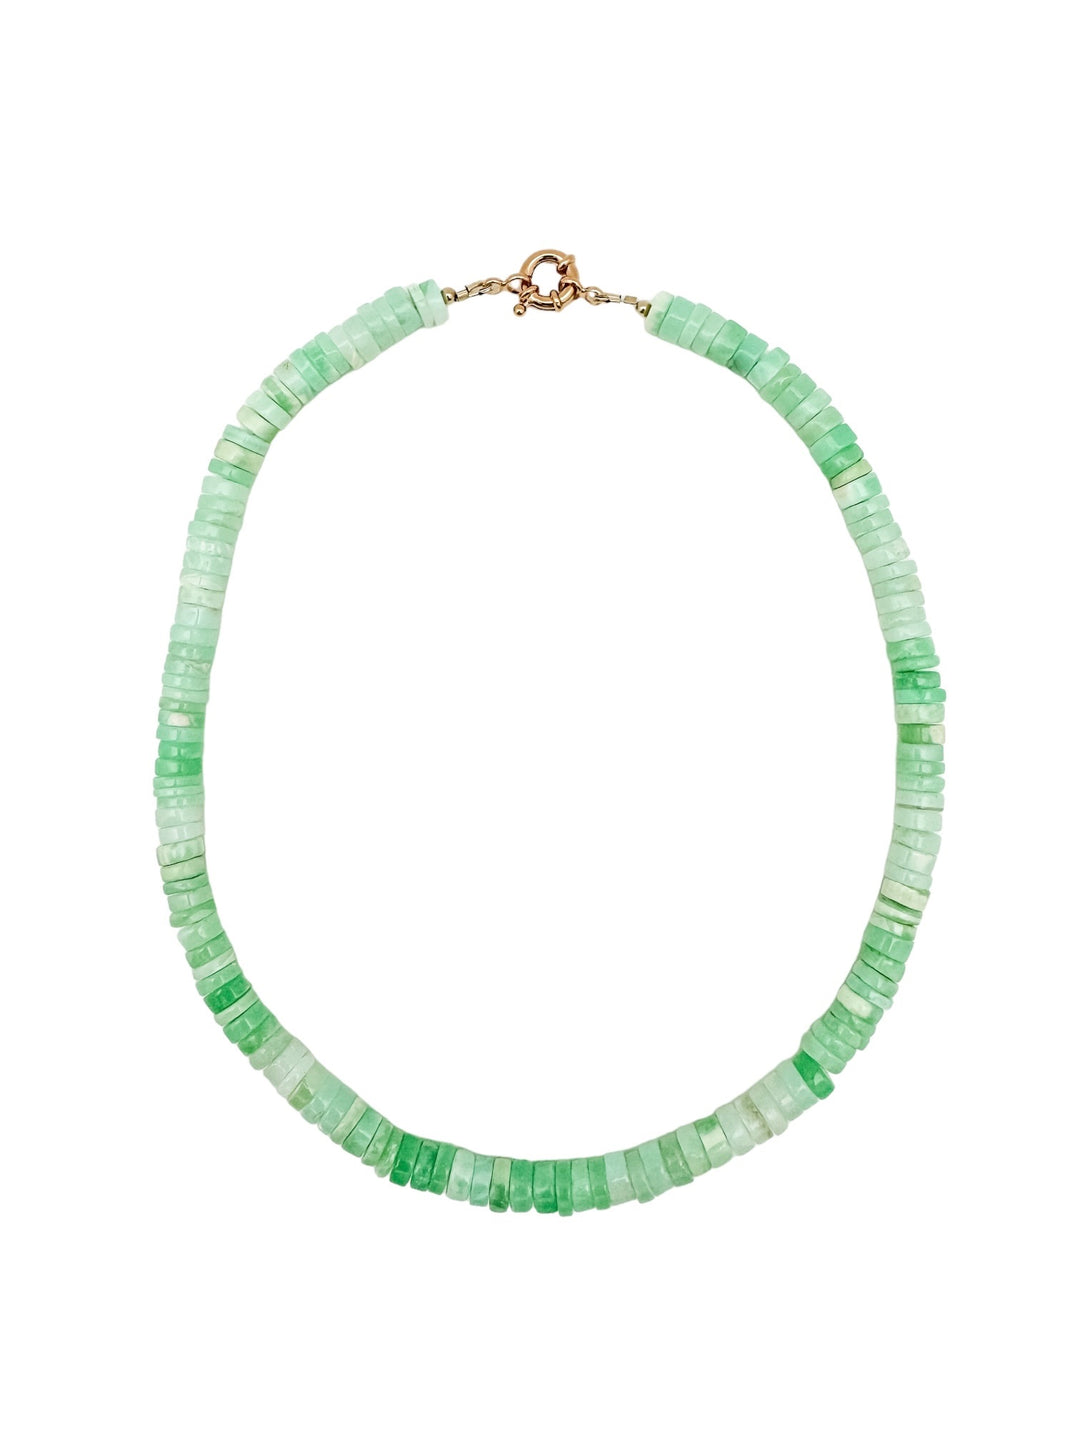 Lime, green gemstone, opal necklace